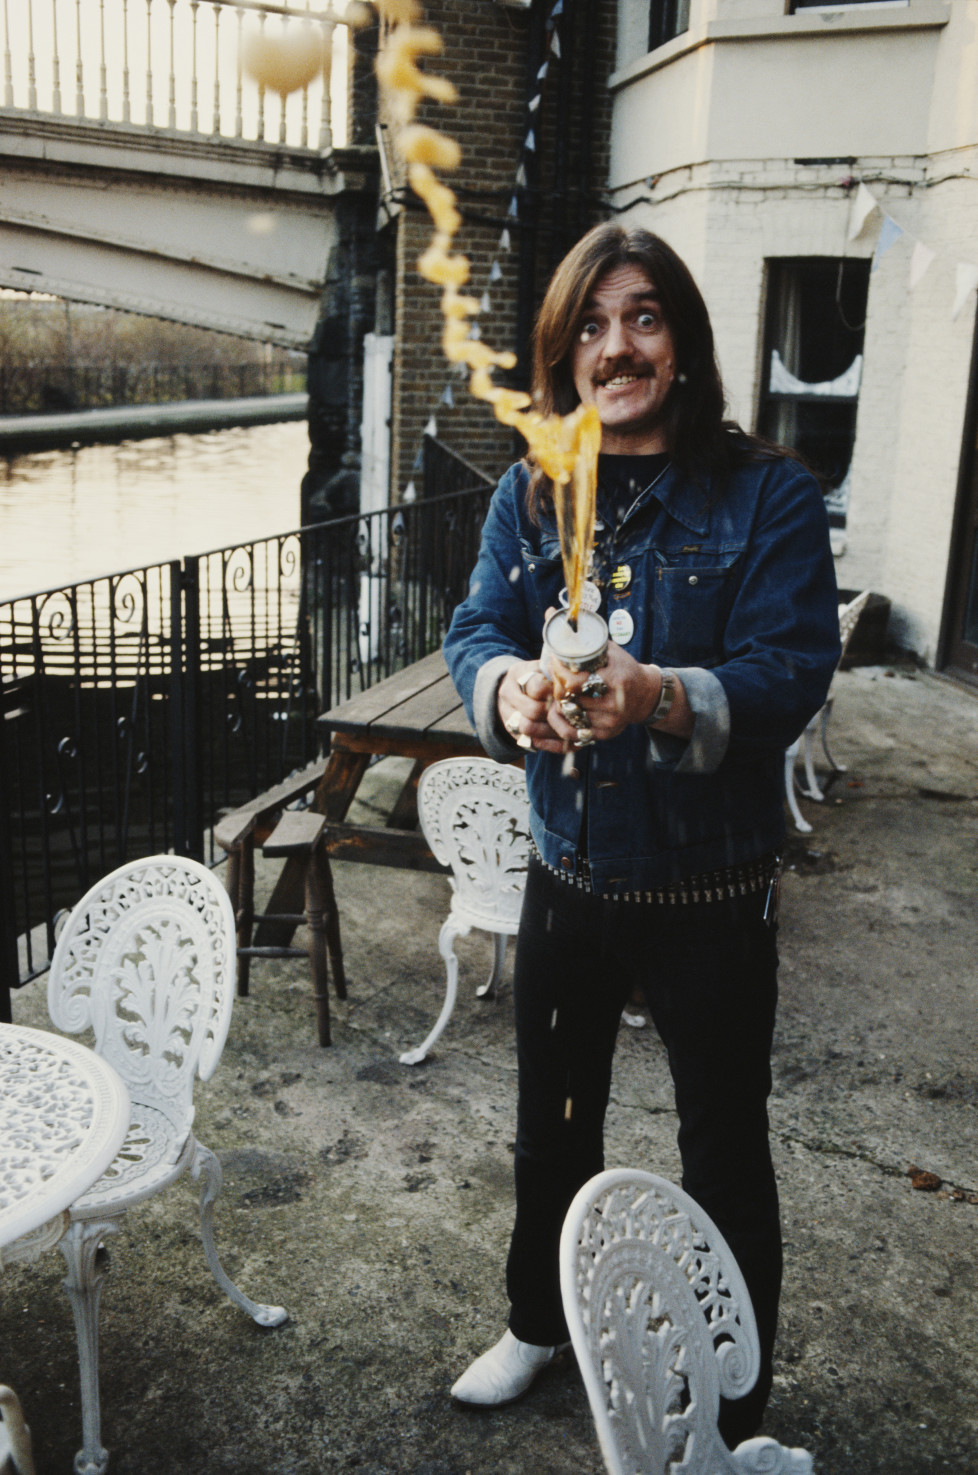 English rock musician and lead vocalist of the rock and roll band Motörhead, Lemmy (Ian Fraser 'Lemmy' Kilmister), spraying beer outside the Carlton Bridge Tavern, Grand Union Canal, London, circa 1985. (Photo by Tony Mottram/Getty Images)